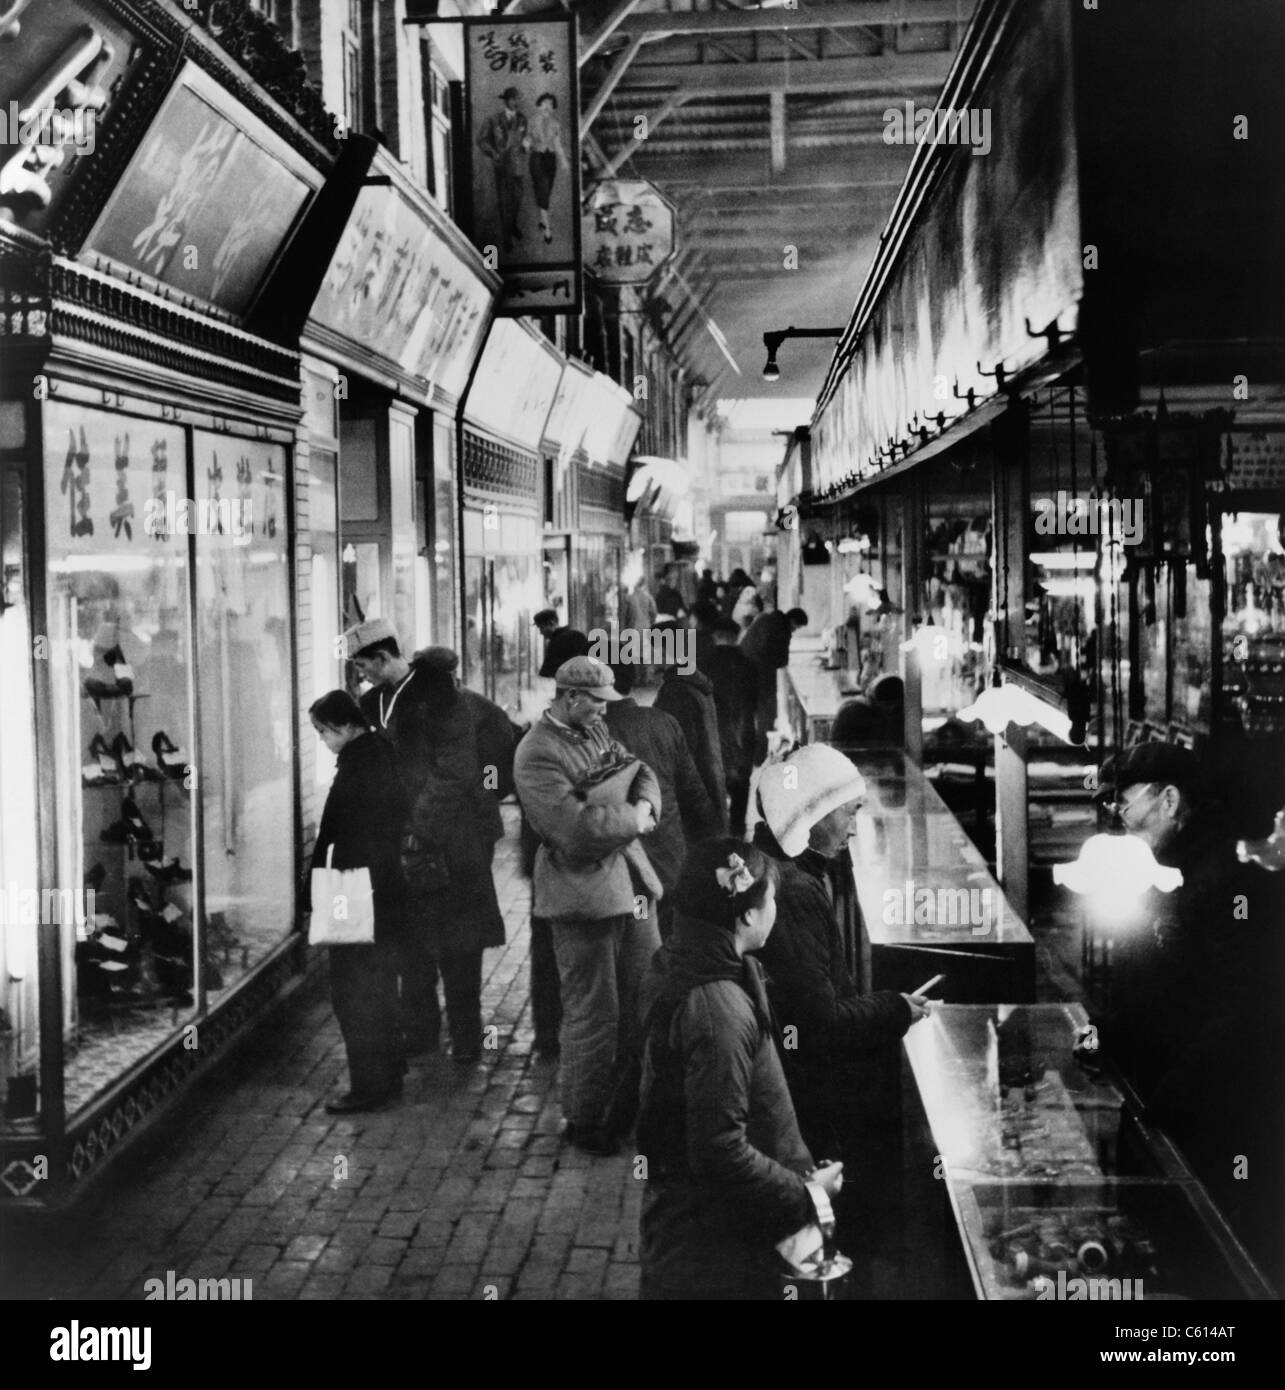 Chinese shoppers eye consumer goods at counters and display windows at the Tung An Bazaar in Beijing China. 1964. (BSLOC_2010_18_100) Stock Photo